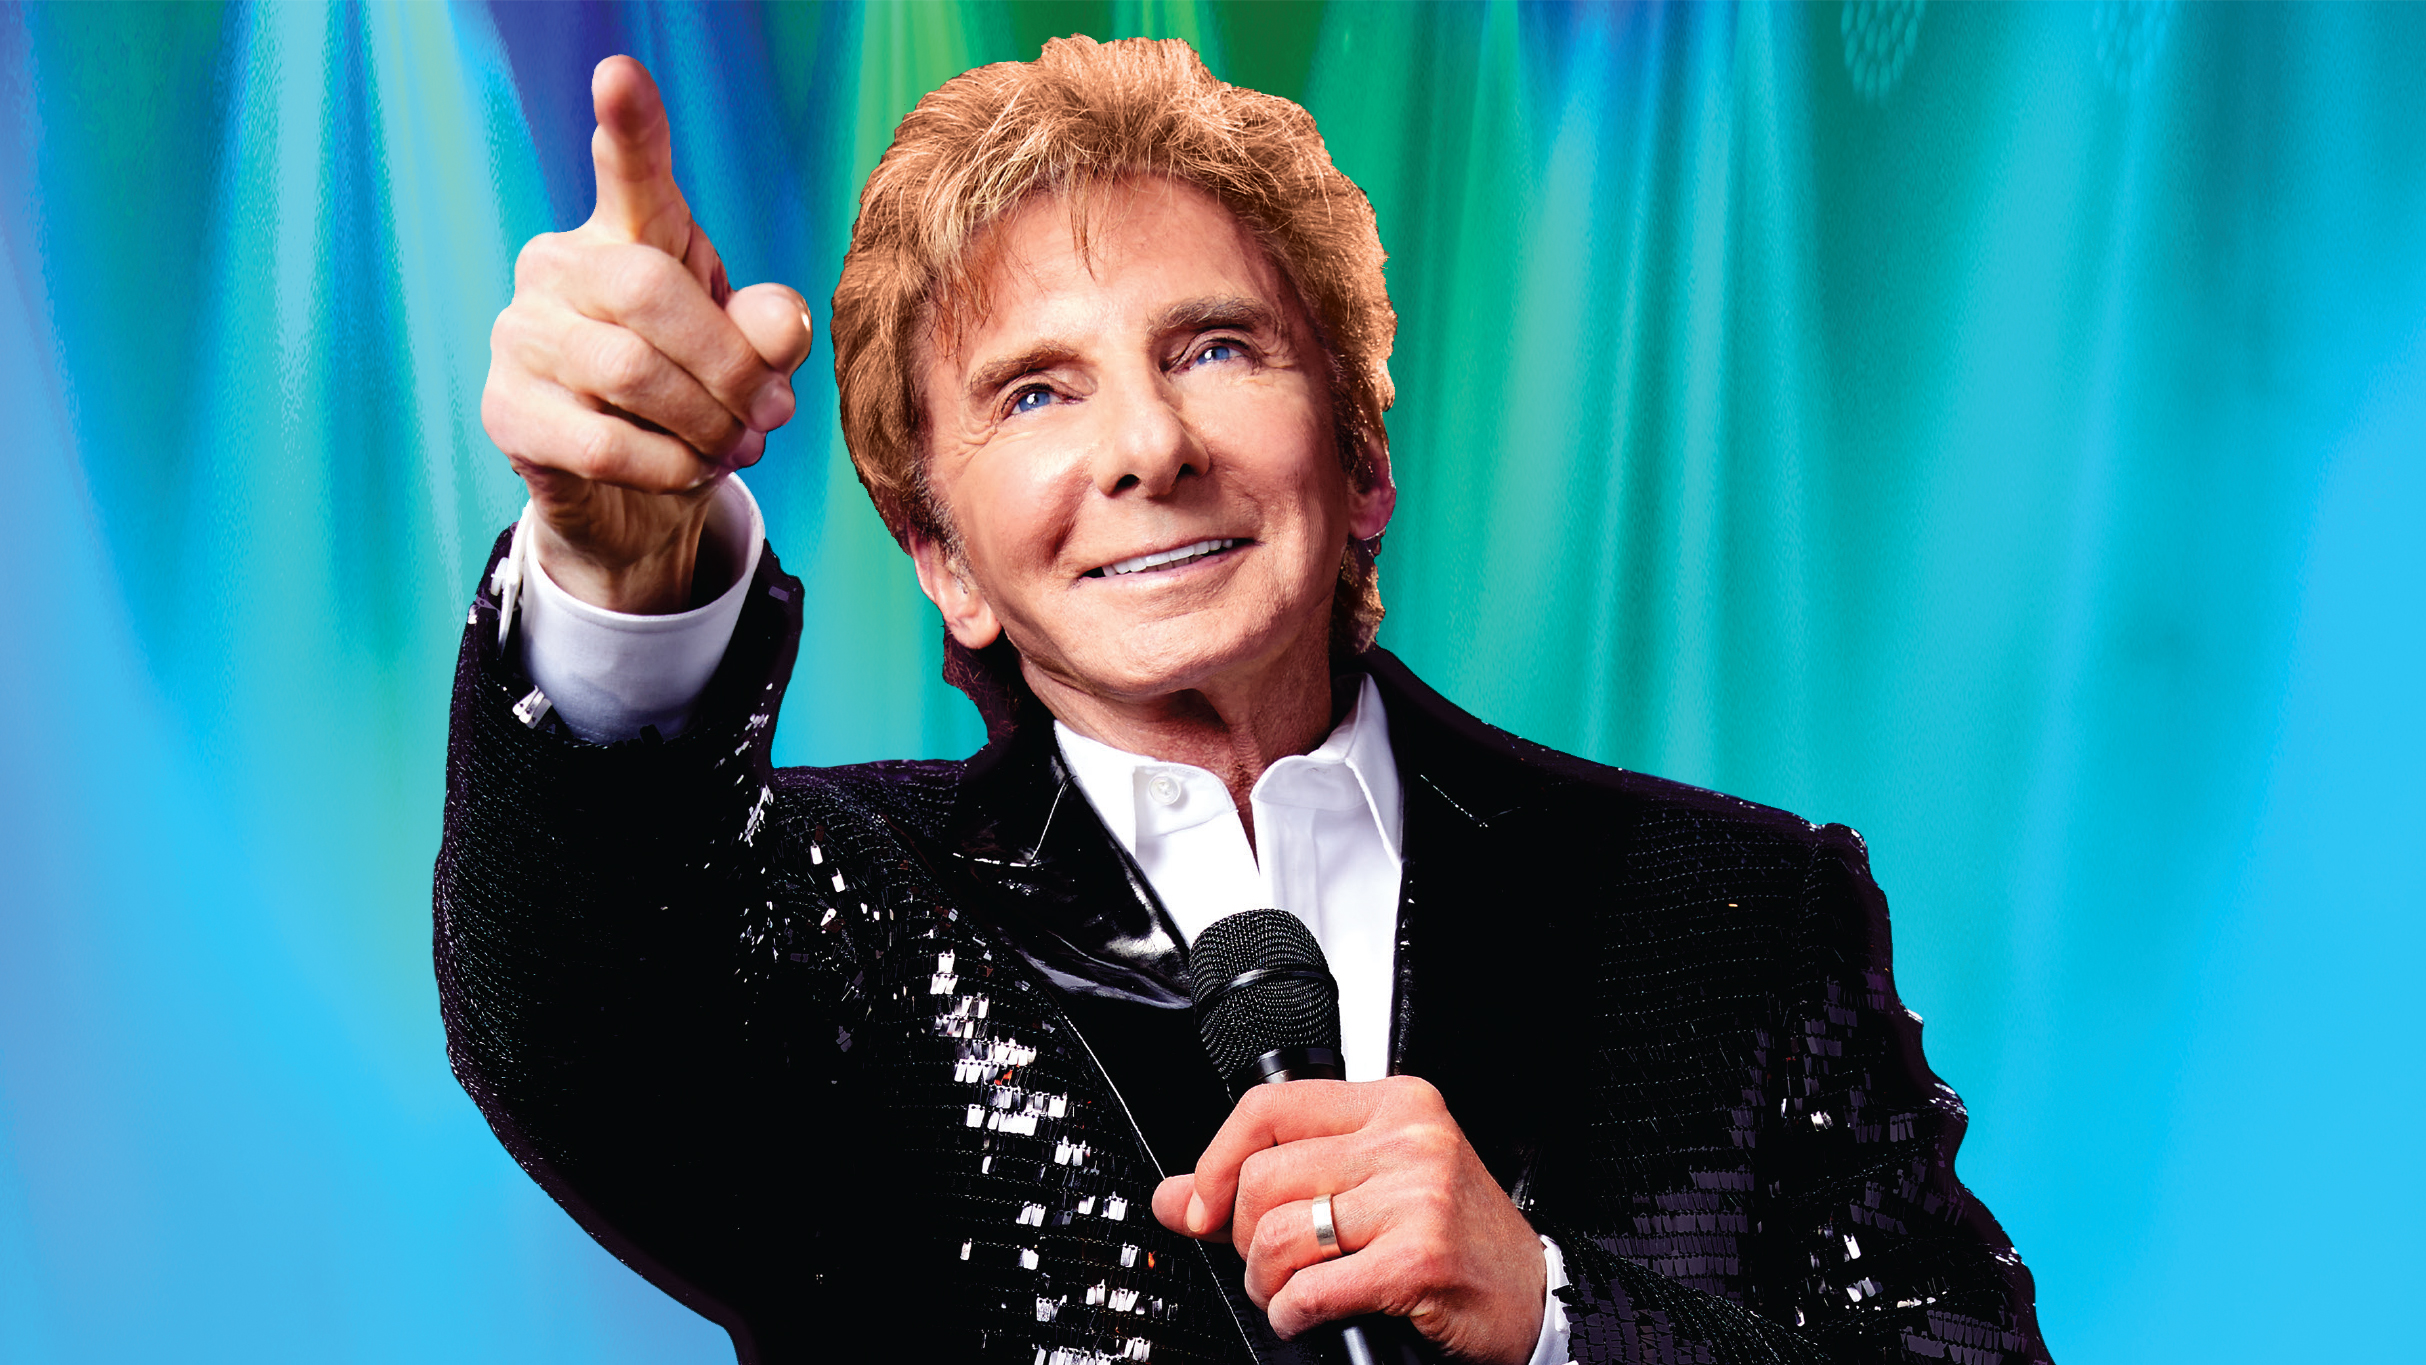 MANILOW: The Last Chicago Concert